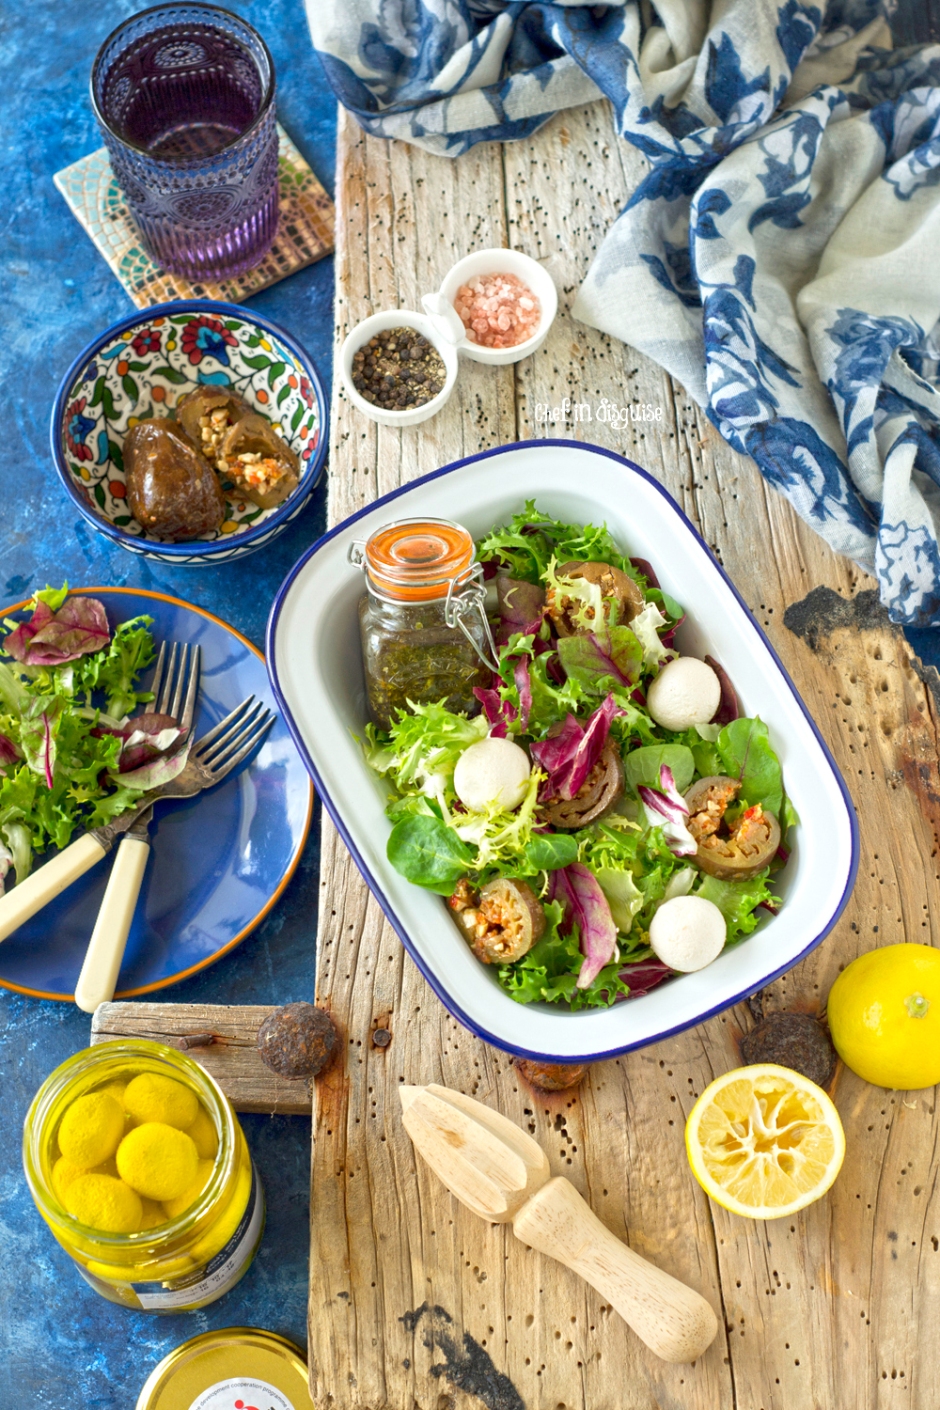 Tangy creamy and addictive. This labneh and makdous salad is the best way to enjoy the flavors of the middle east